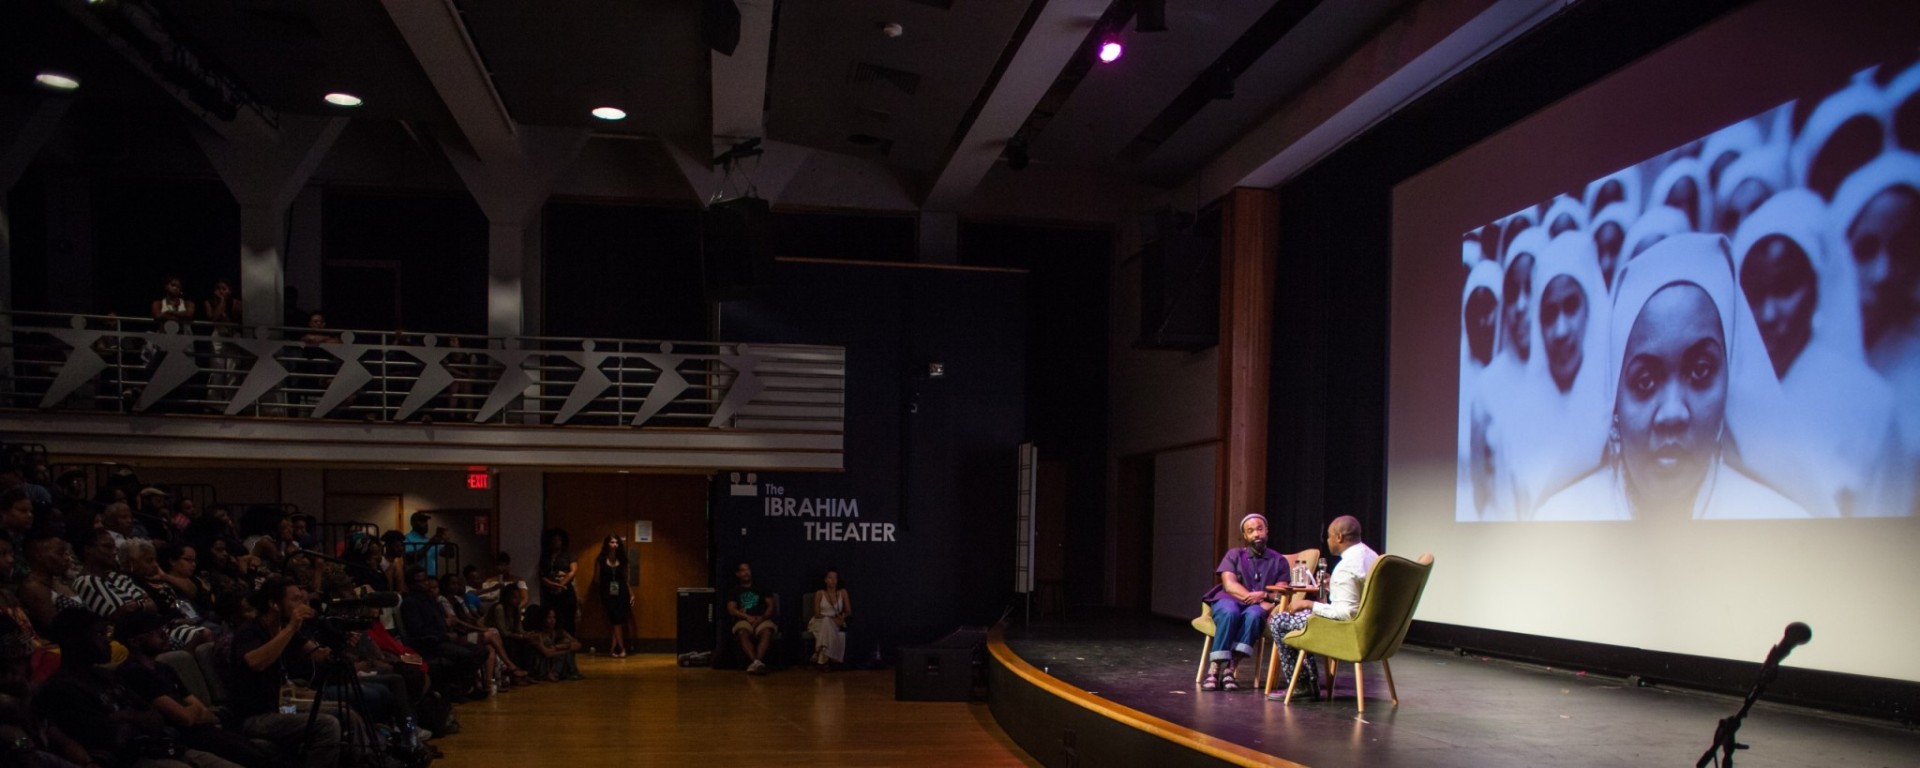 A photo of two people on stage in conversation. There is a packed audience listening in.